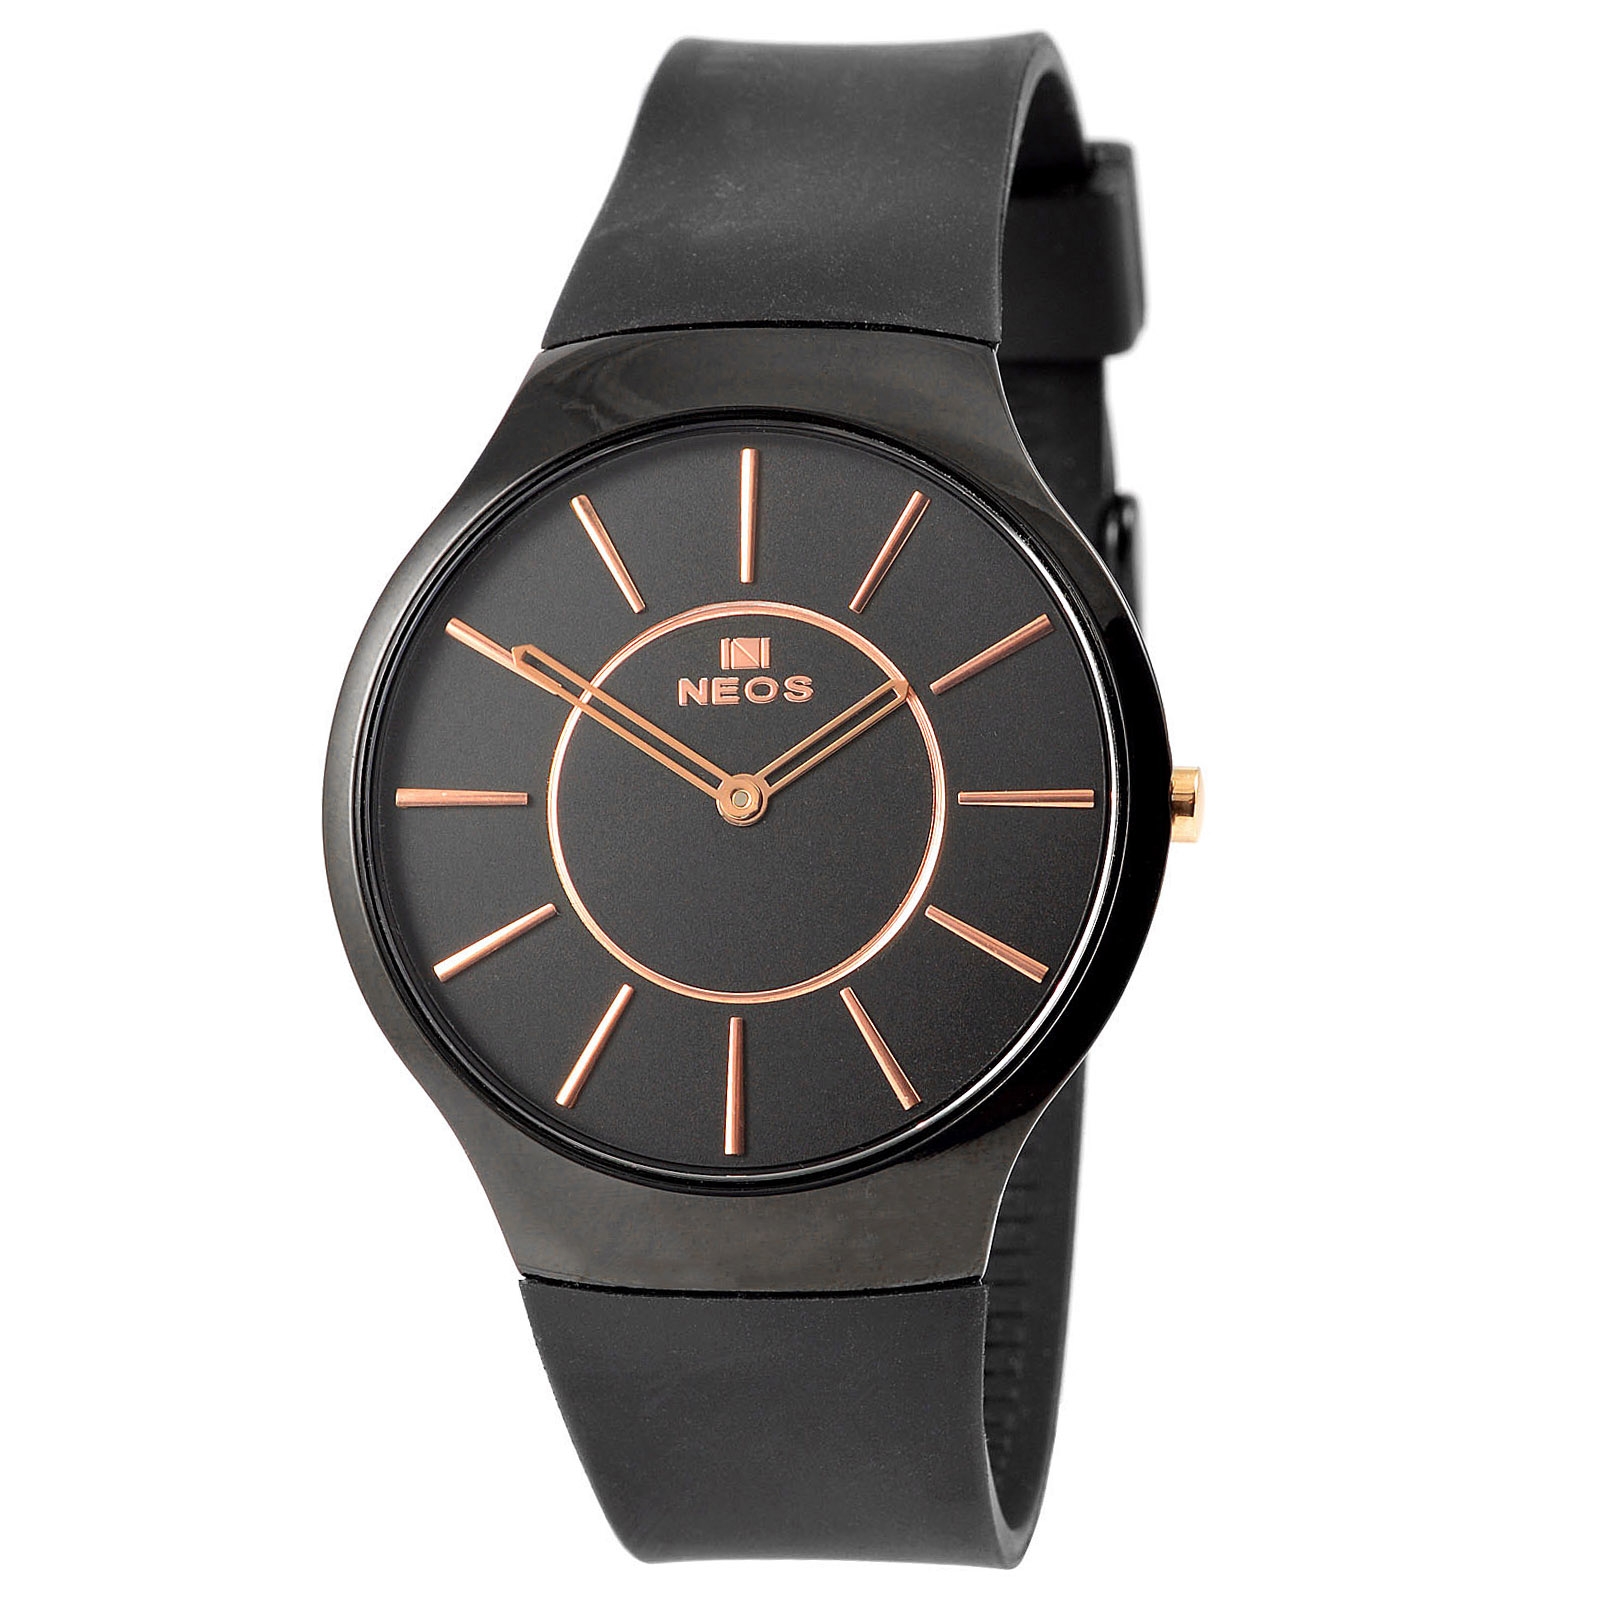 Adrian Sapphire Watch | NEOS | Free shipping